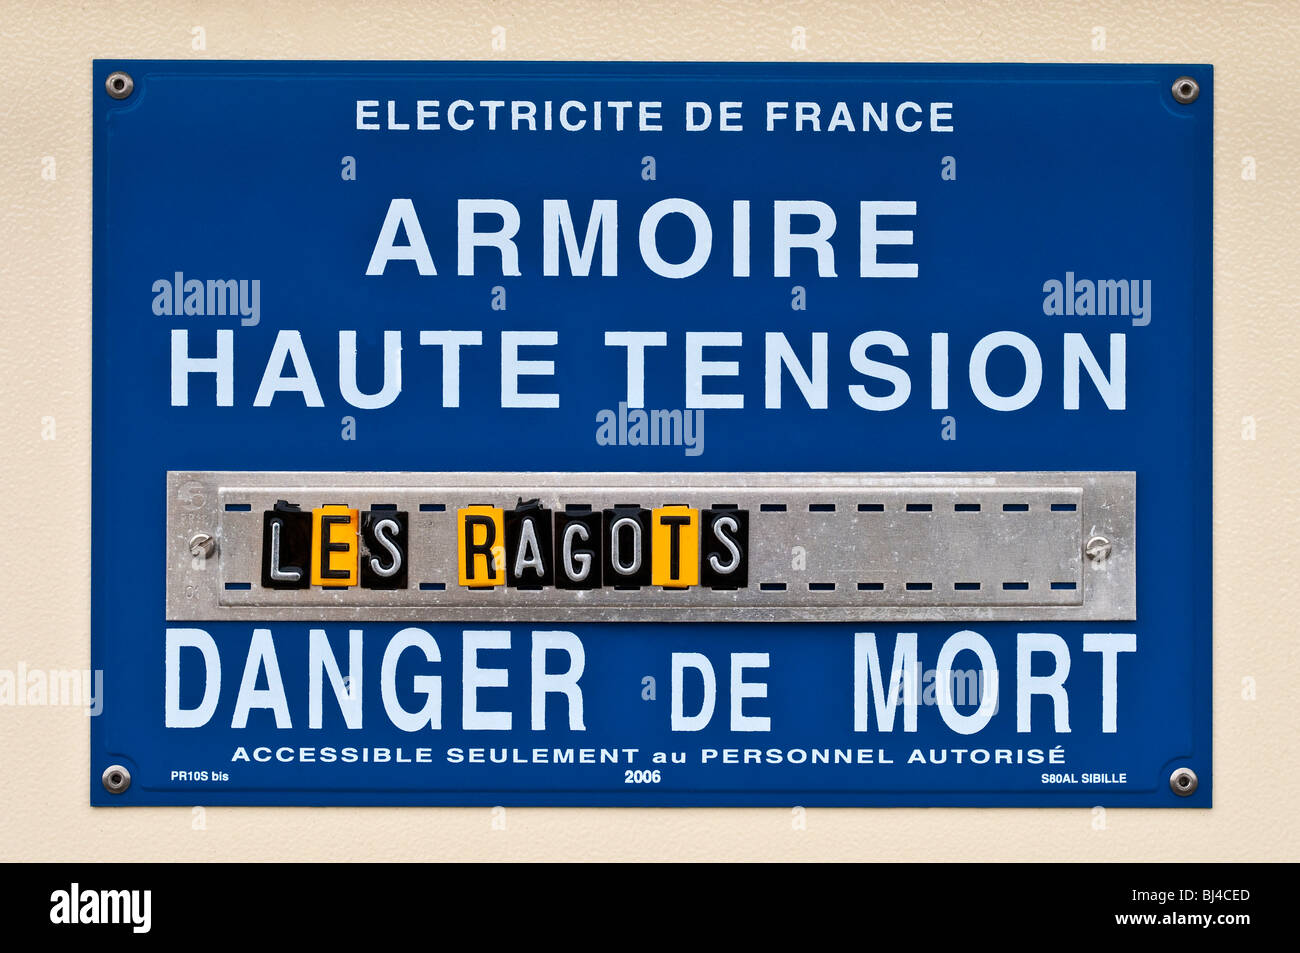 Warning notice at electricity sub-station - France. Stock Photo